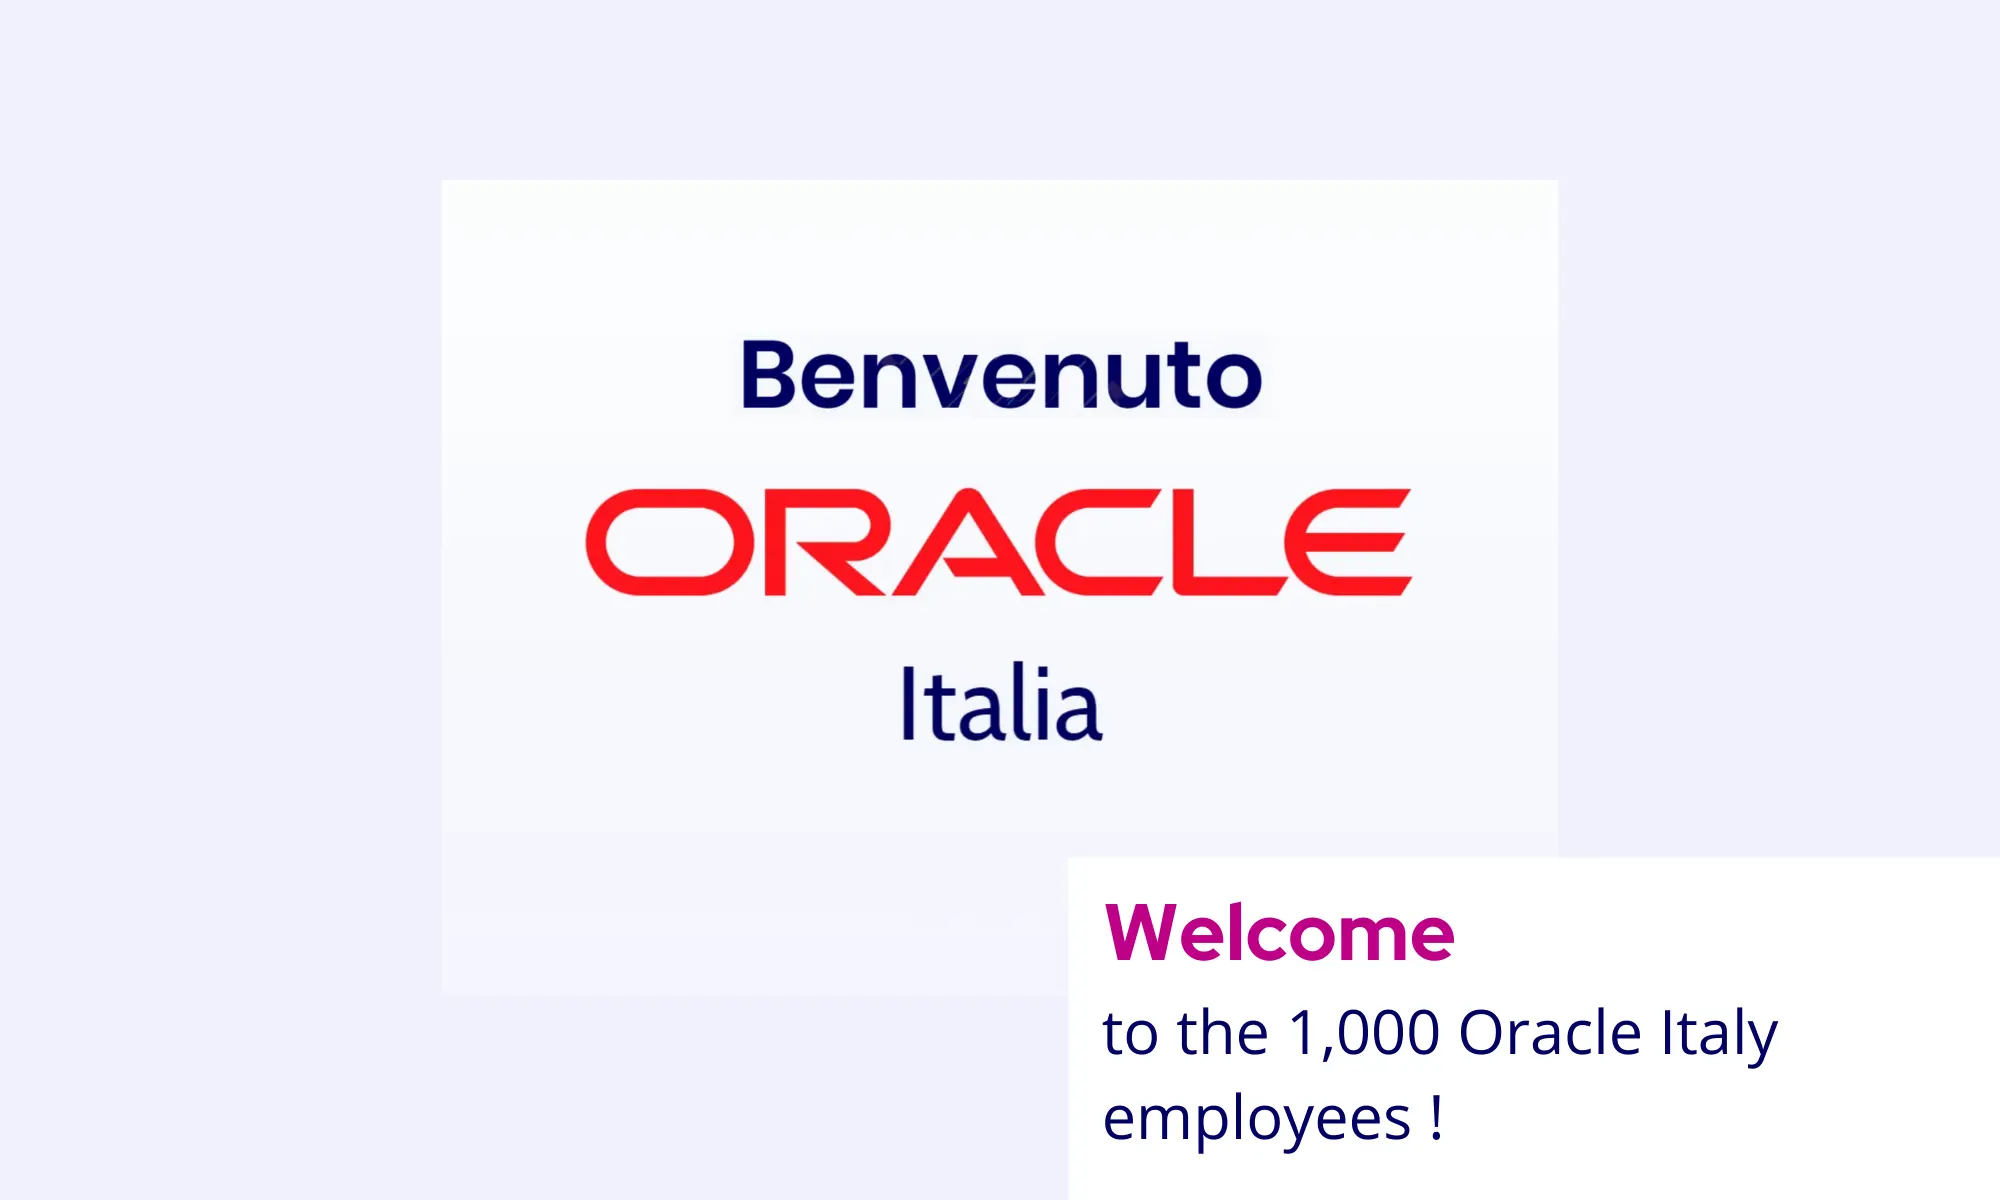 Welcome to Oracle Italy